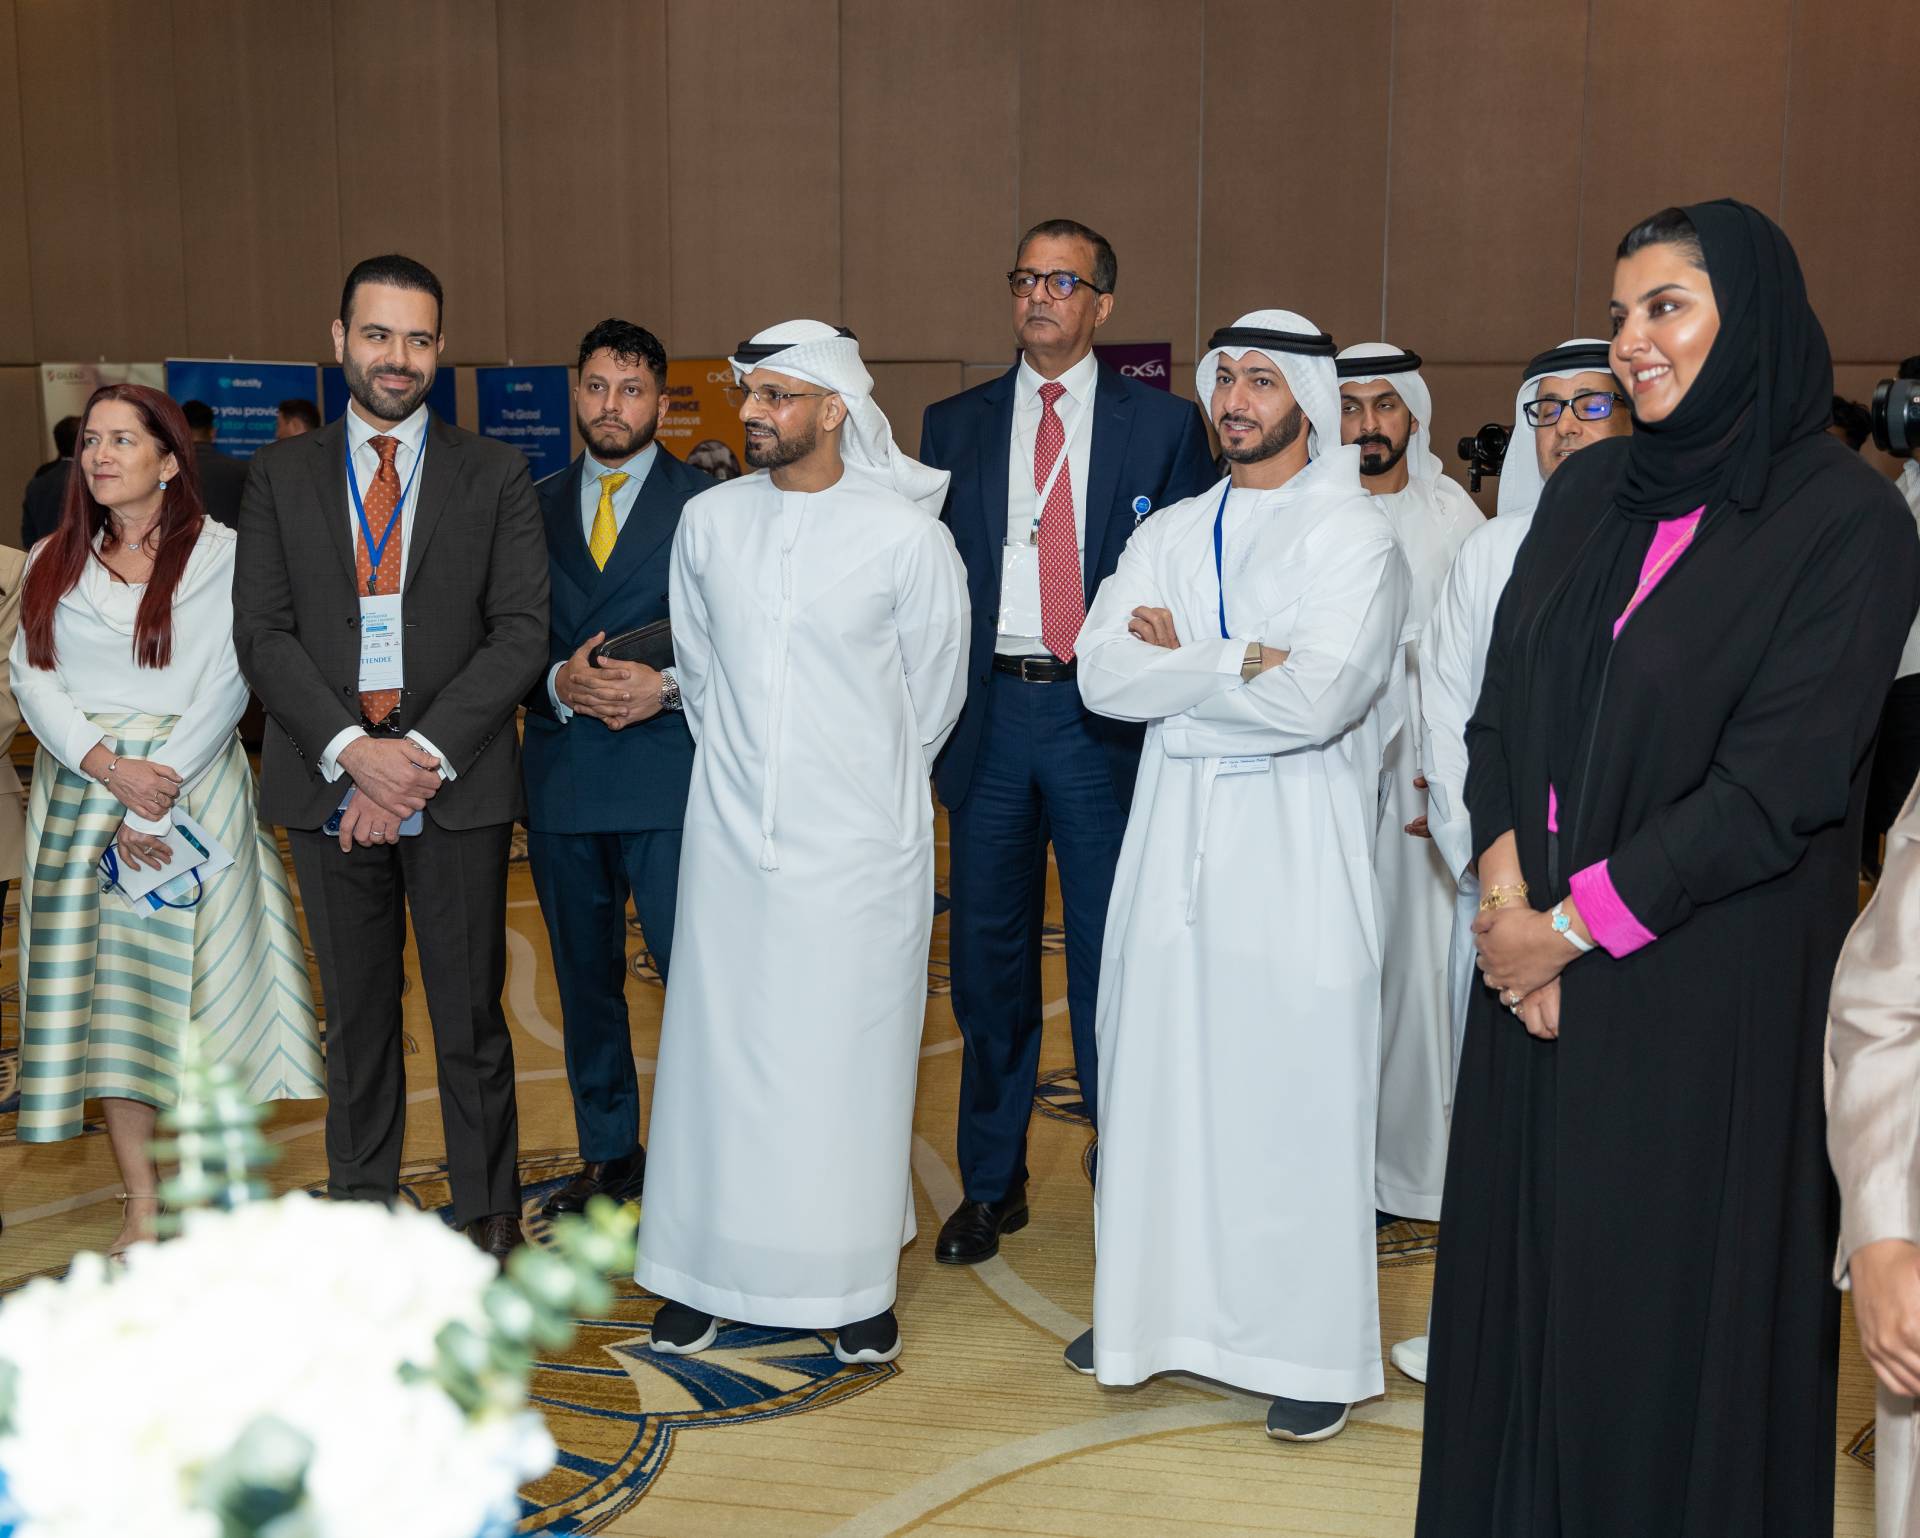 Under the Patronage of H.H. Sheikha Fatima bint Mubarak Sheikh Shakhbout Medical City to address innovations in patient care at 6th Annual International Patient Experience Symposium